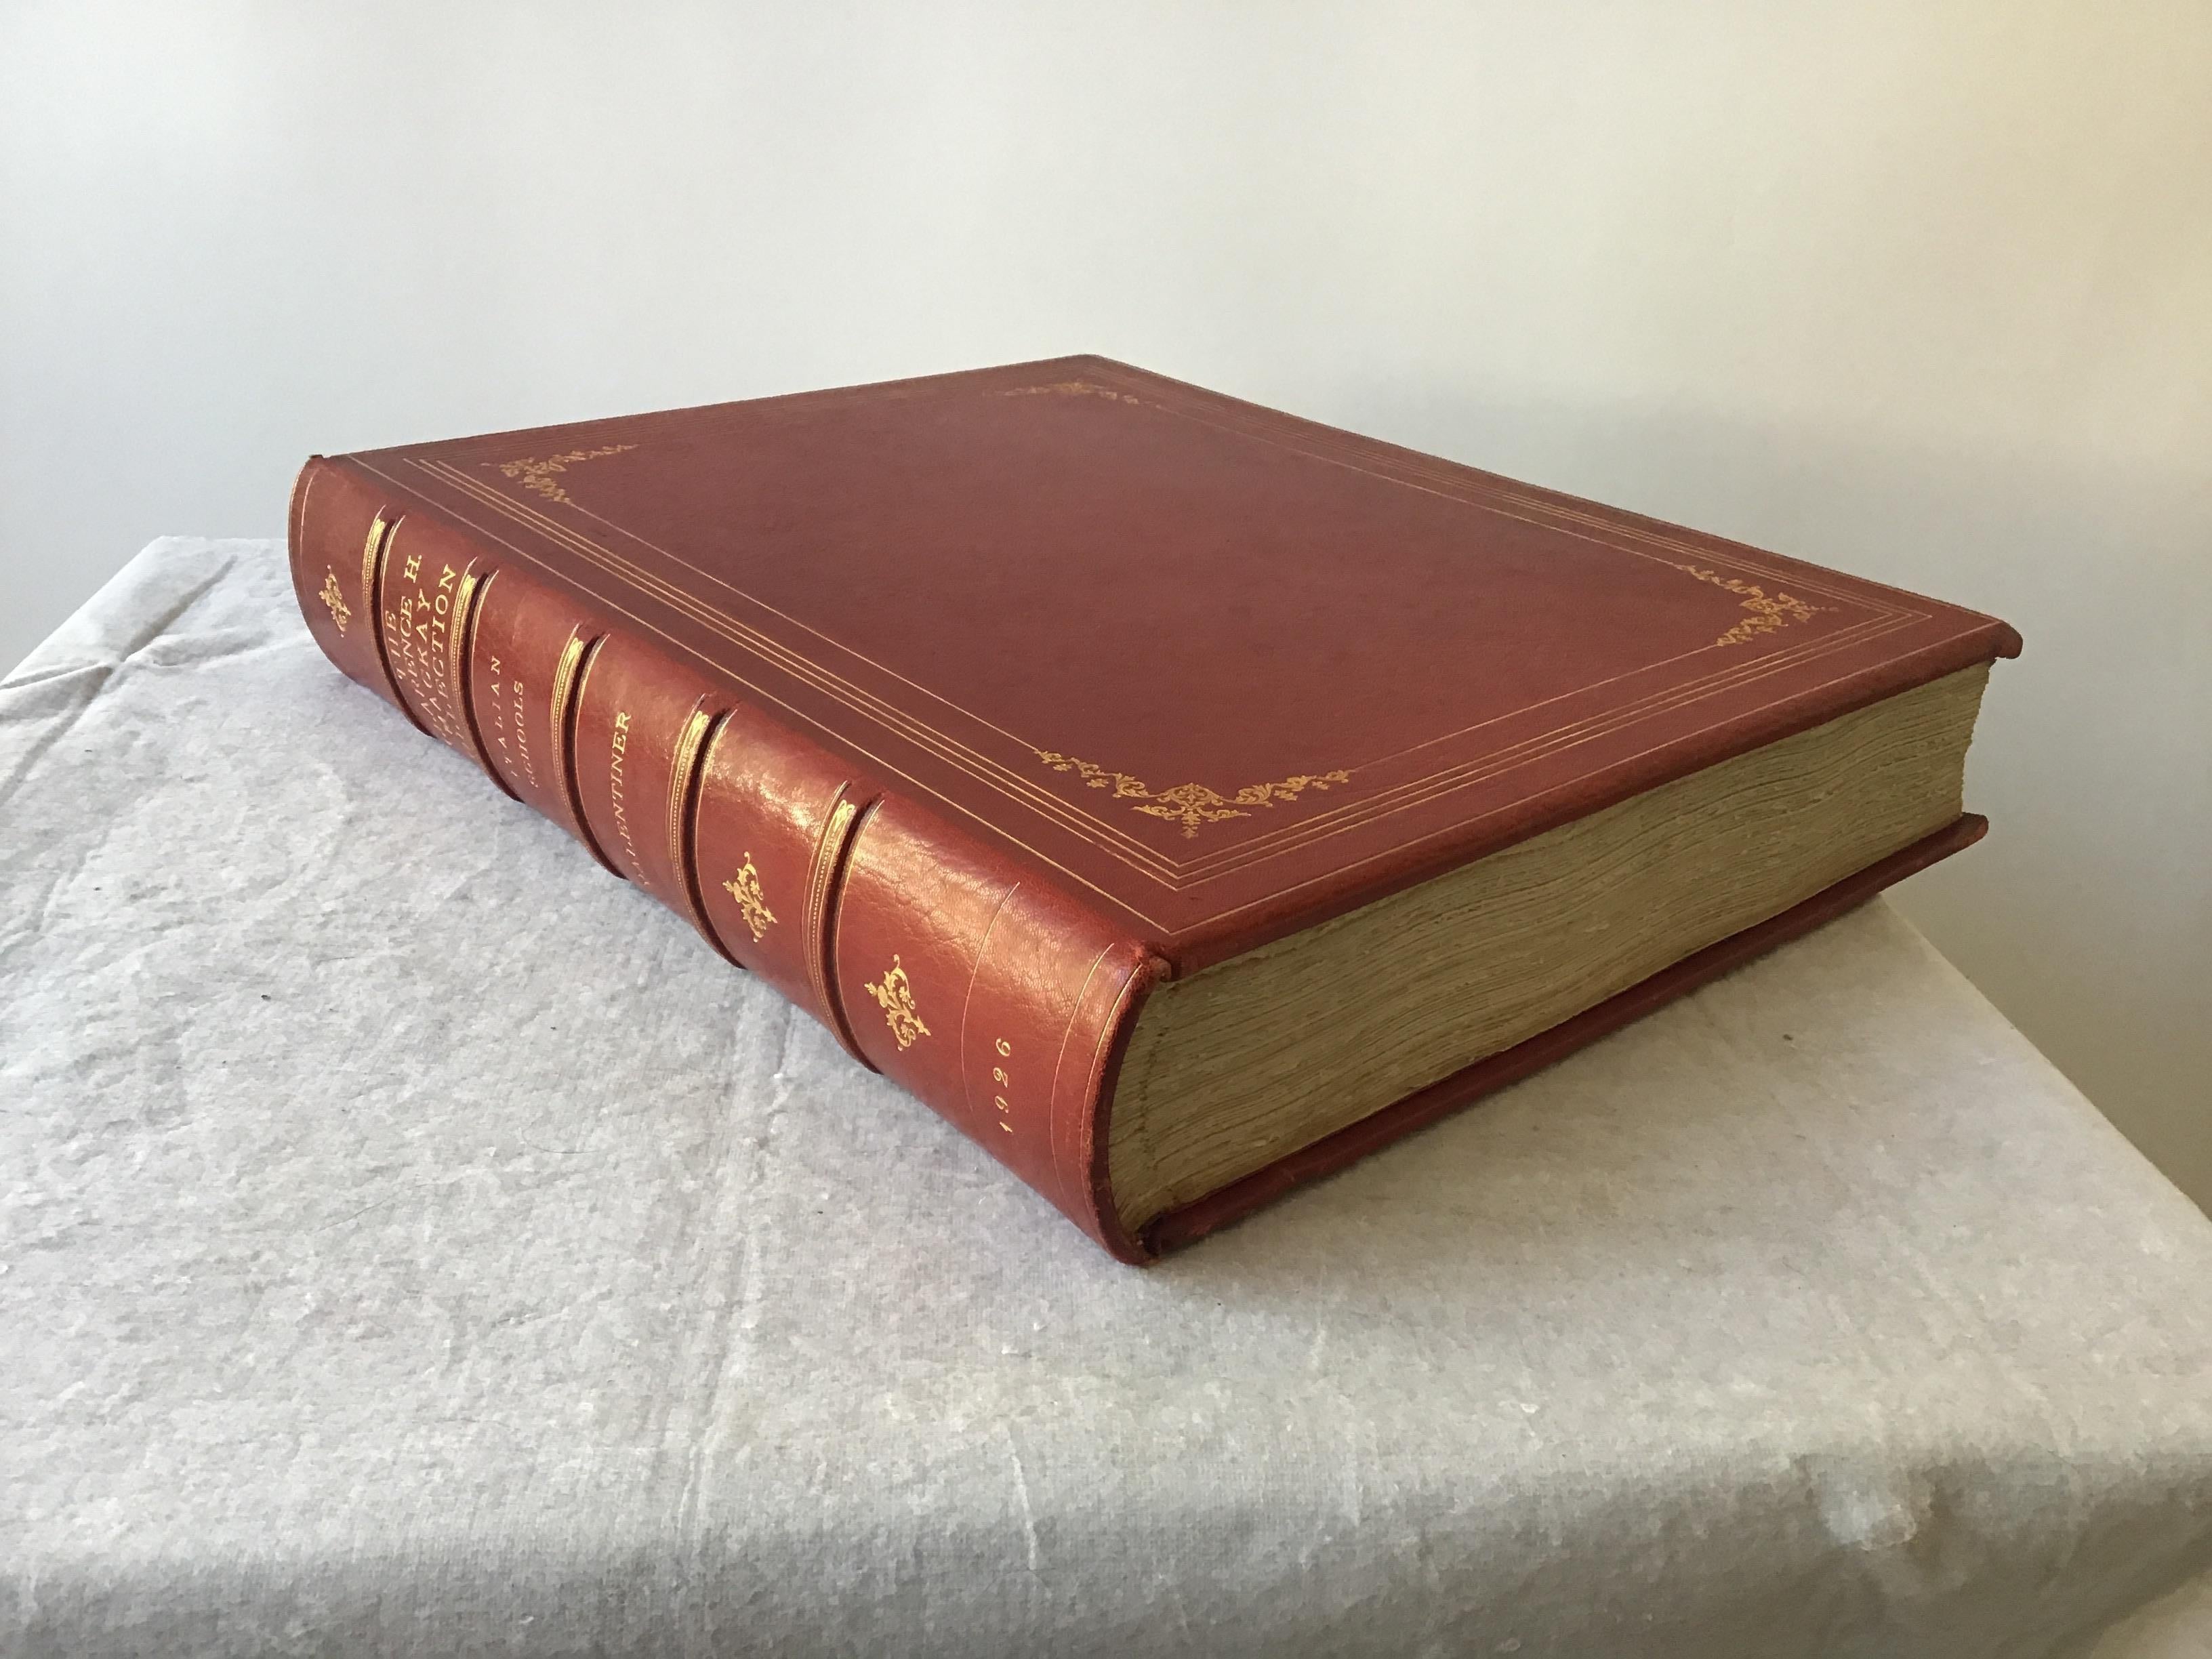 56 Photogravure plates. Privately printed in 1926 by Witherspoon & Co. Cover bound in Moroccan crimson leather with gilt flower motifs.
Privately printed catalogue limited to 100 numbered copies, printed on Fine thick paper. #31 out of 100 copies.